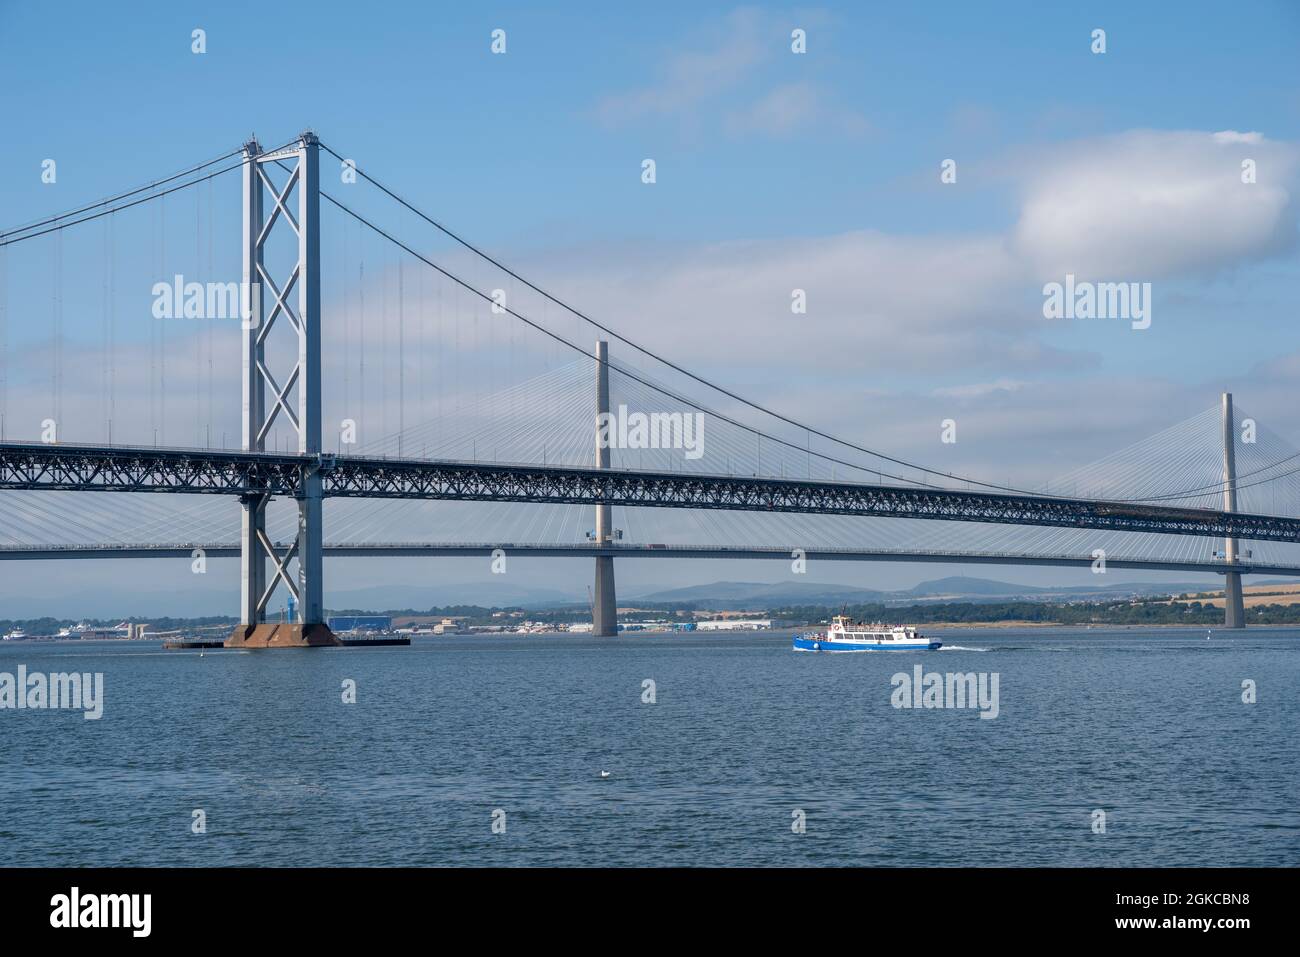 South Queensferry, Edinburgh, Scotland 7th September 2021 - View of the Forth Road Bridge and Queensferry Crossing with a Ferry Boat on a sunny day Stock Photo